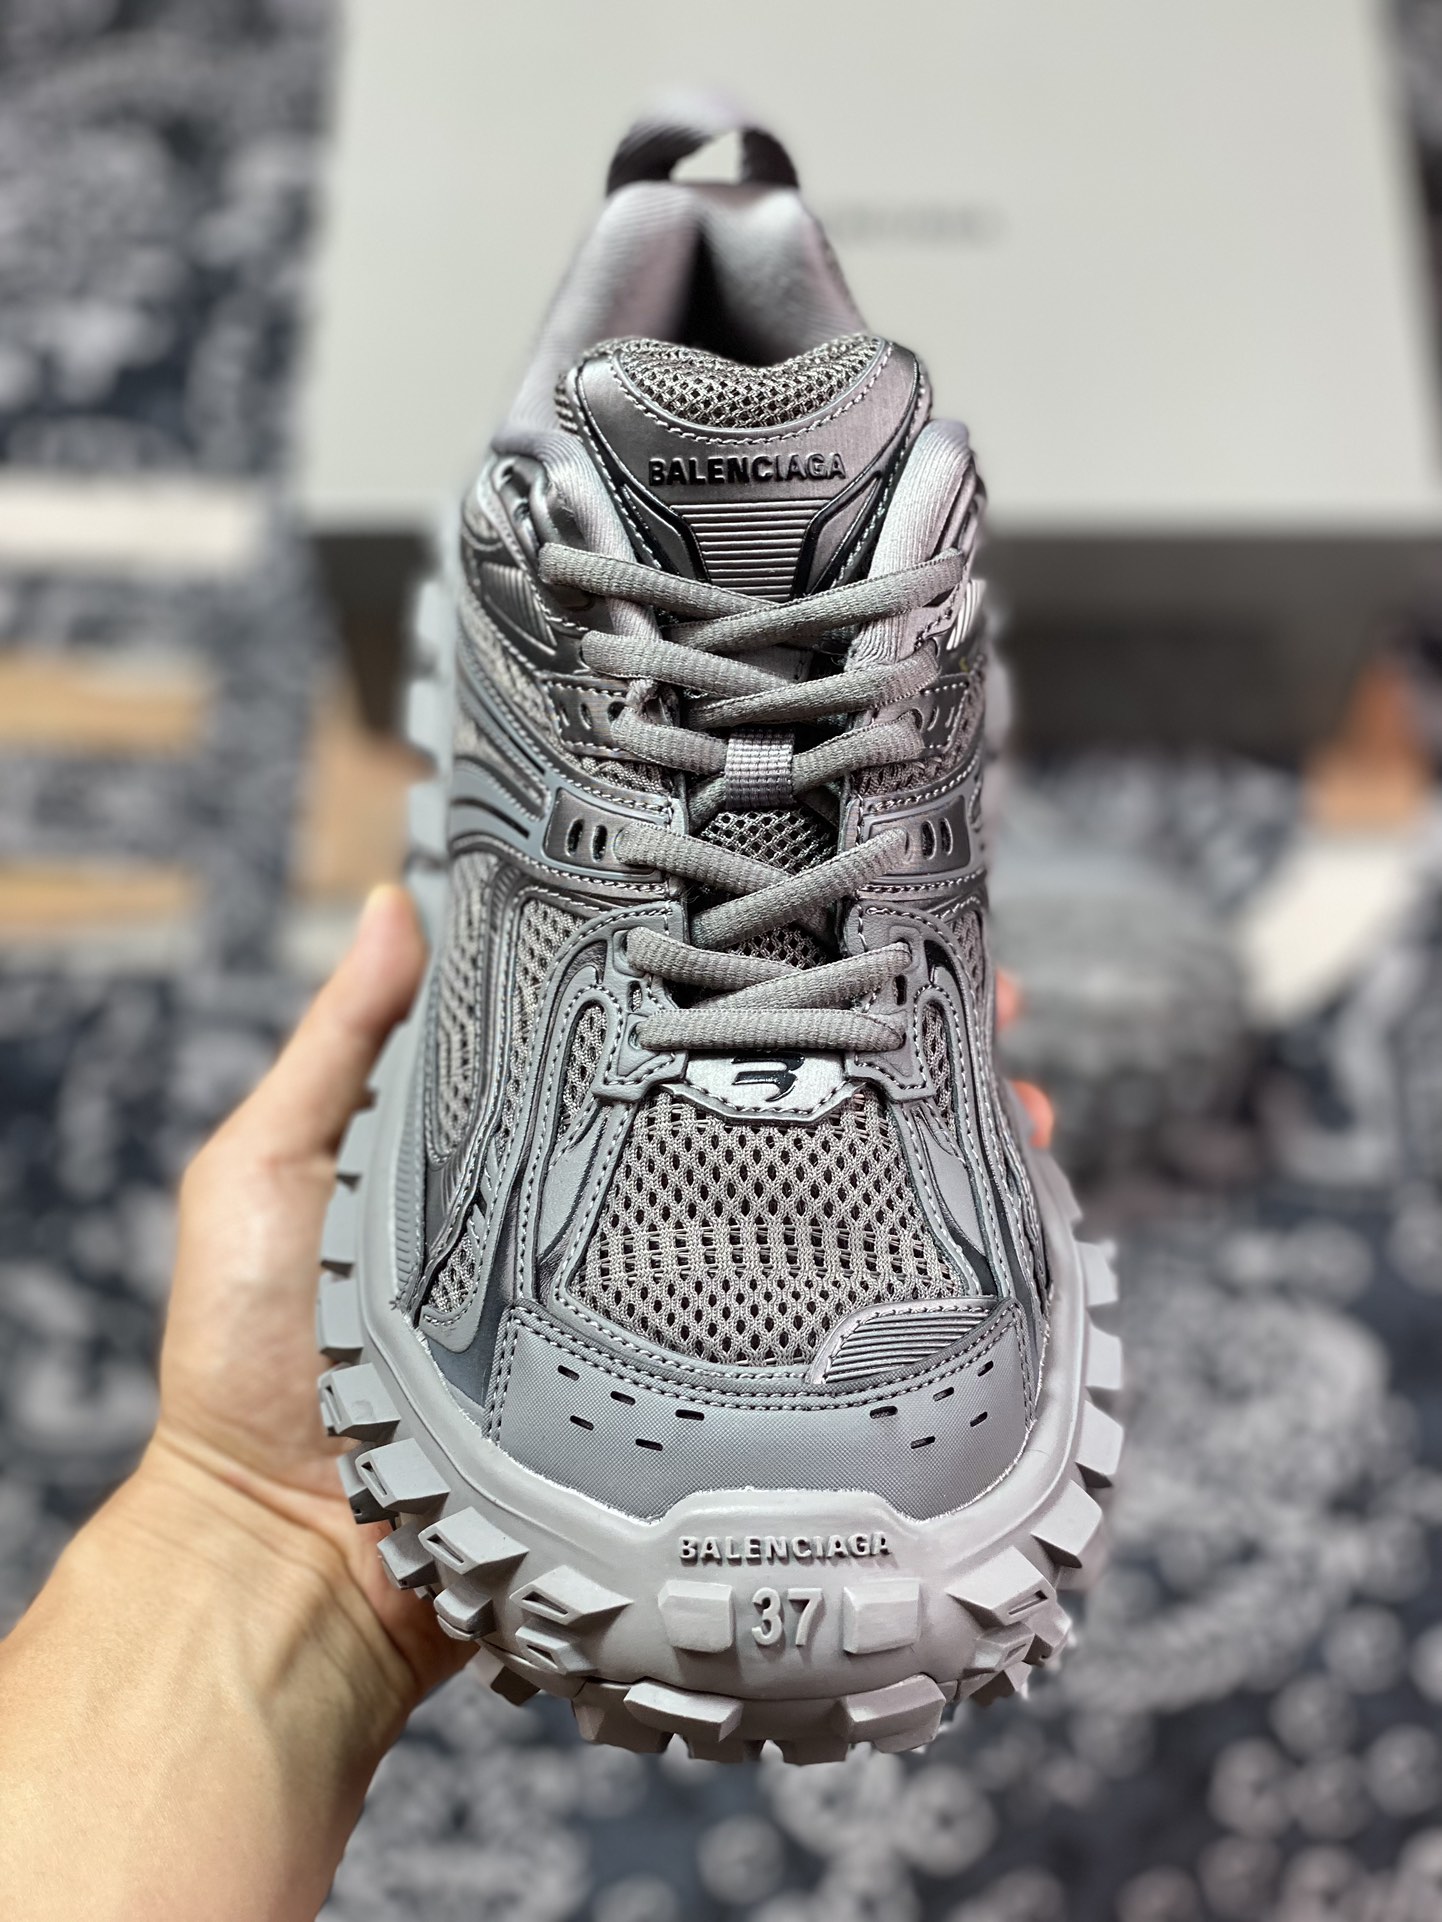 Balenciaga Defender Rubber Platform Sneakers Guardian Series Low Gang Tire Tire Tire Tire type 685611 W2ra6 3000